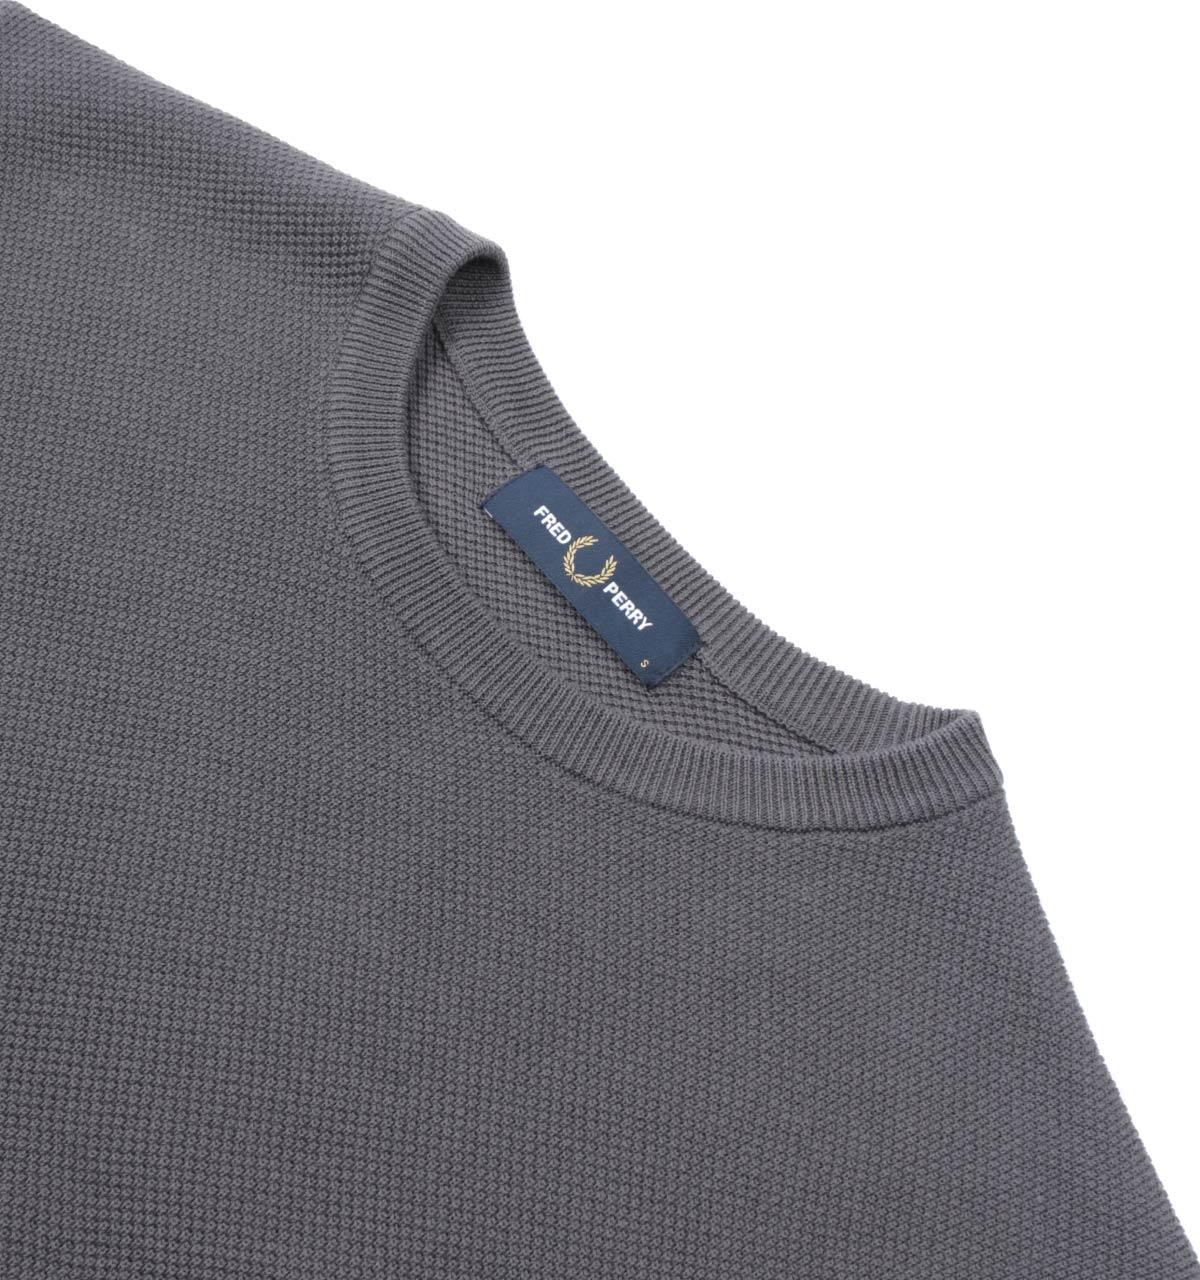 Details about   FRED PERRY Men's Textured Pique Knit Crew Neck Jumper Stone Sizes XL XXL 